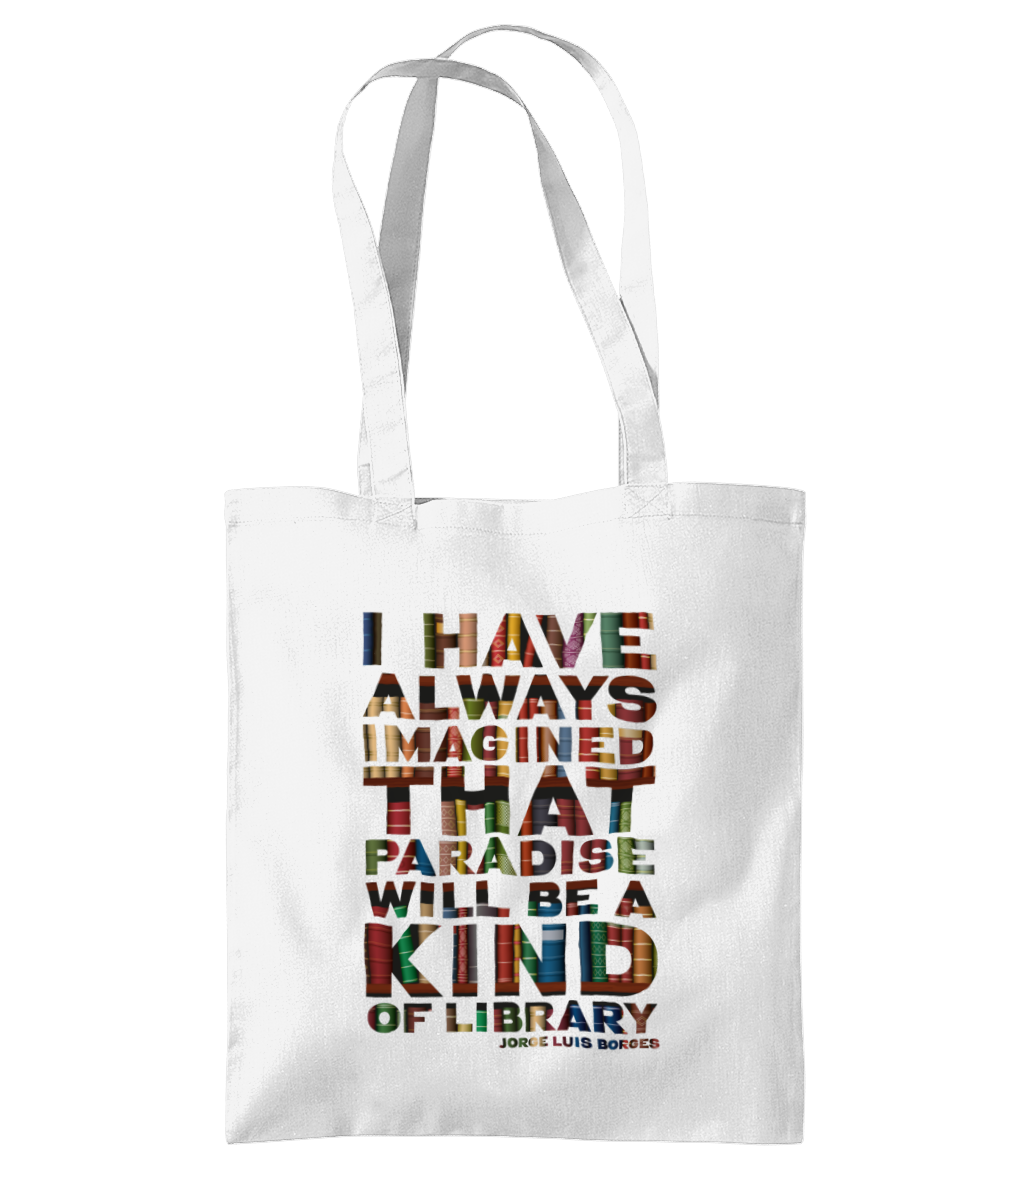 Shoulder Tote Bag Paradise featuring the quote "I have always imagined that Paradise is a kind of Library"